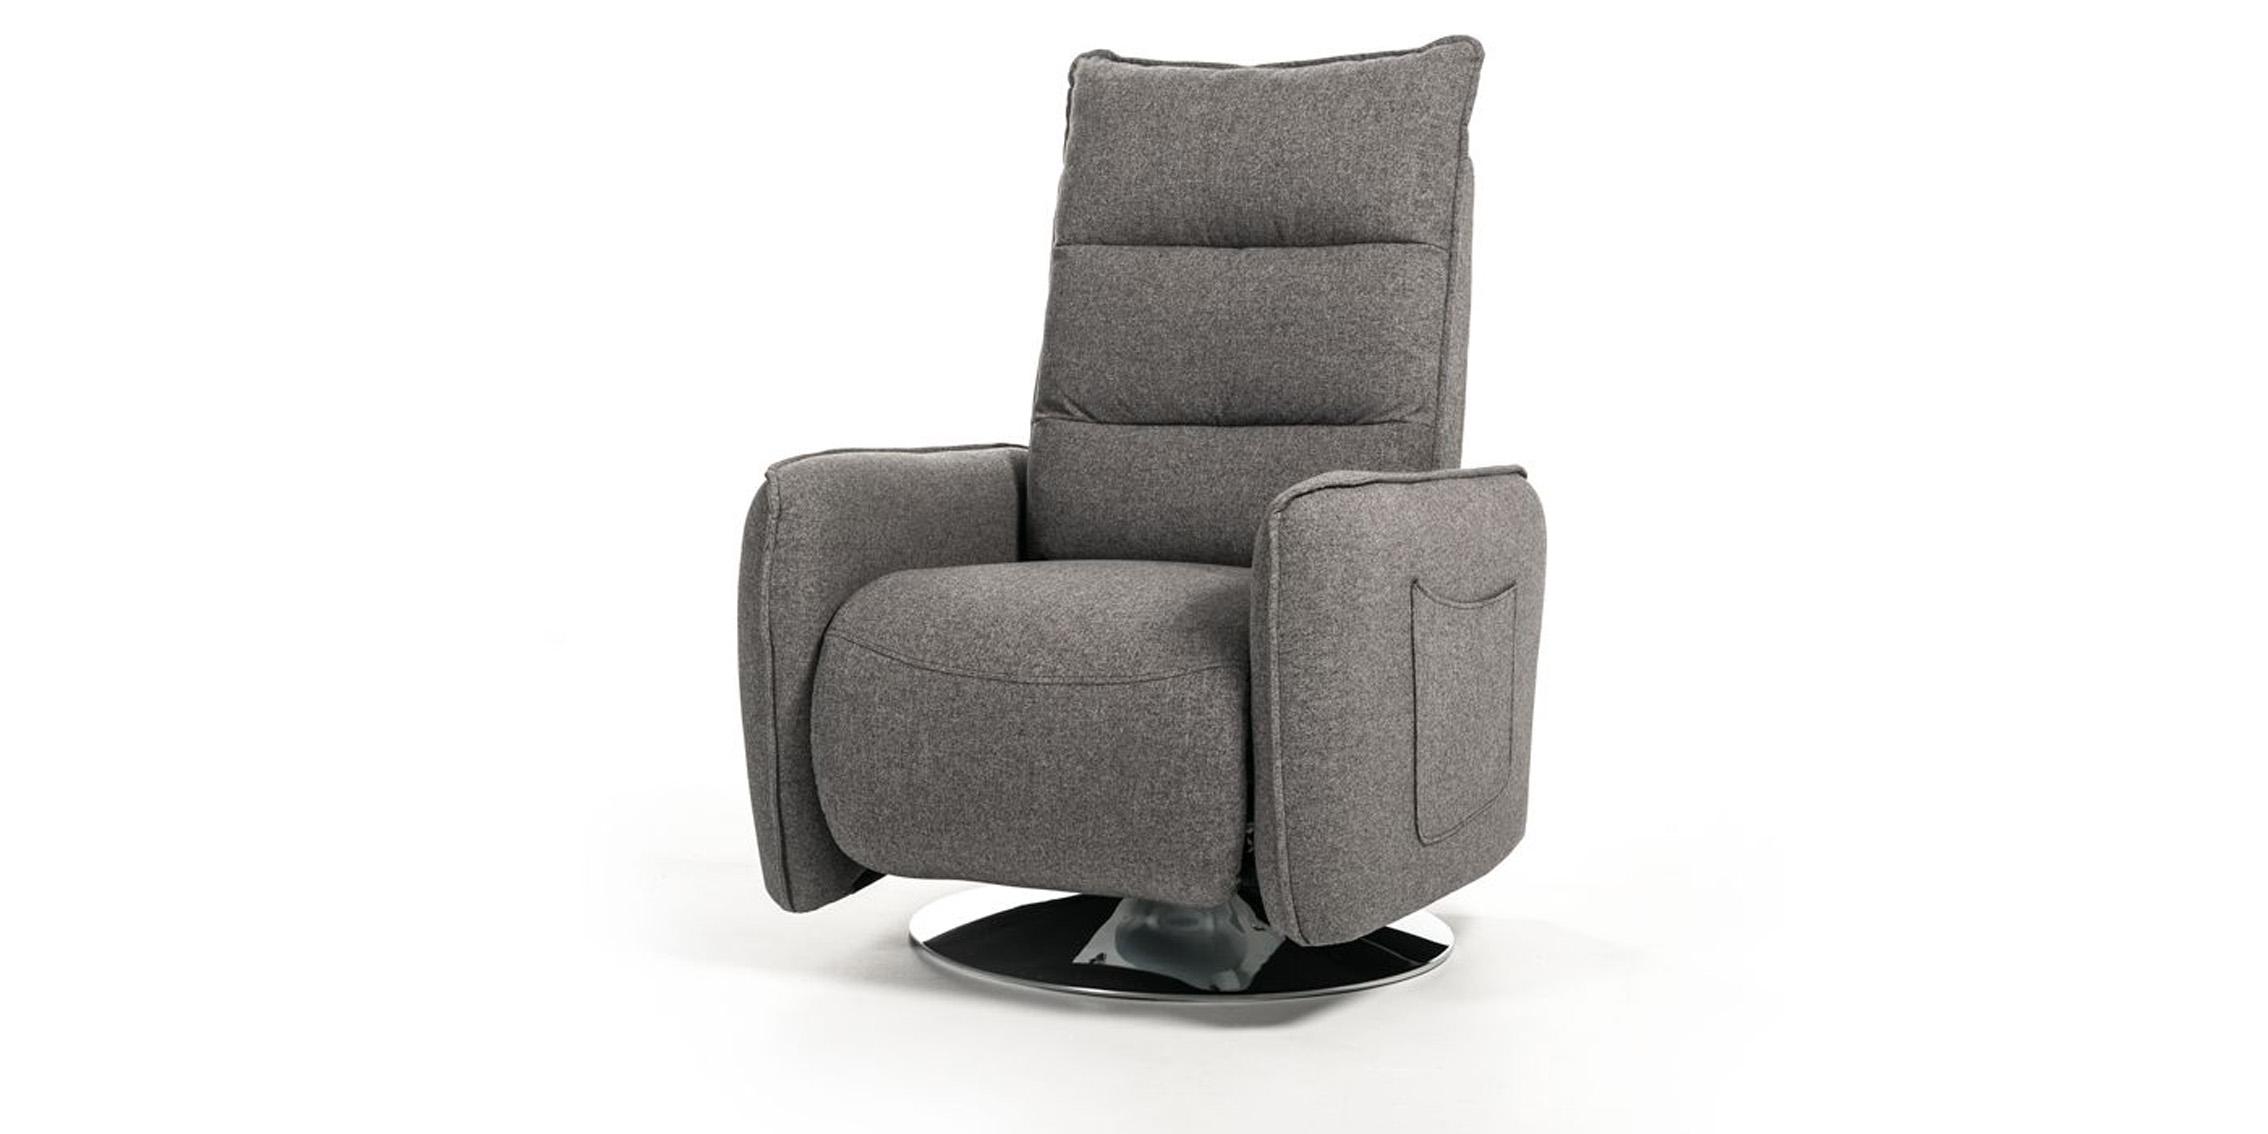 Contemporary, Modern Recliner Chair VGMB-R033-GRY VGMB-R033-GRY in Gray Fabric